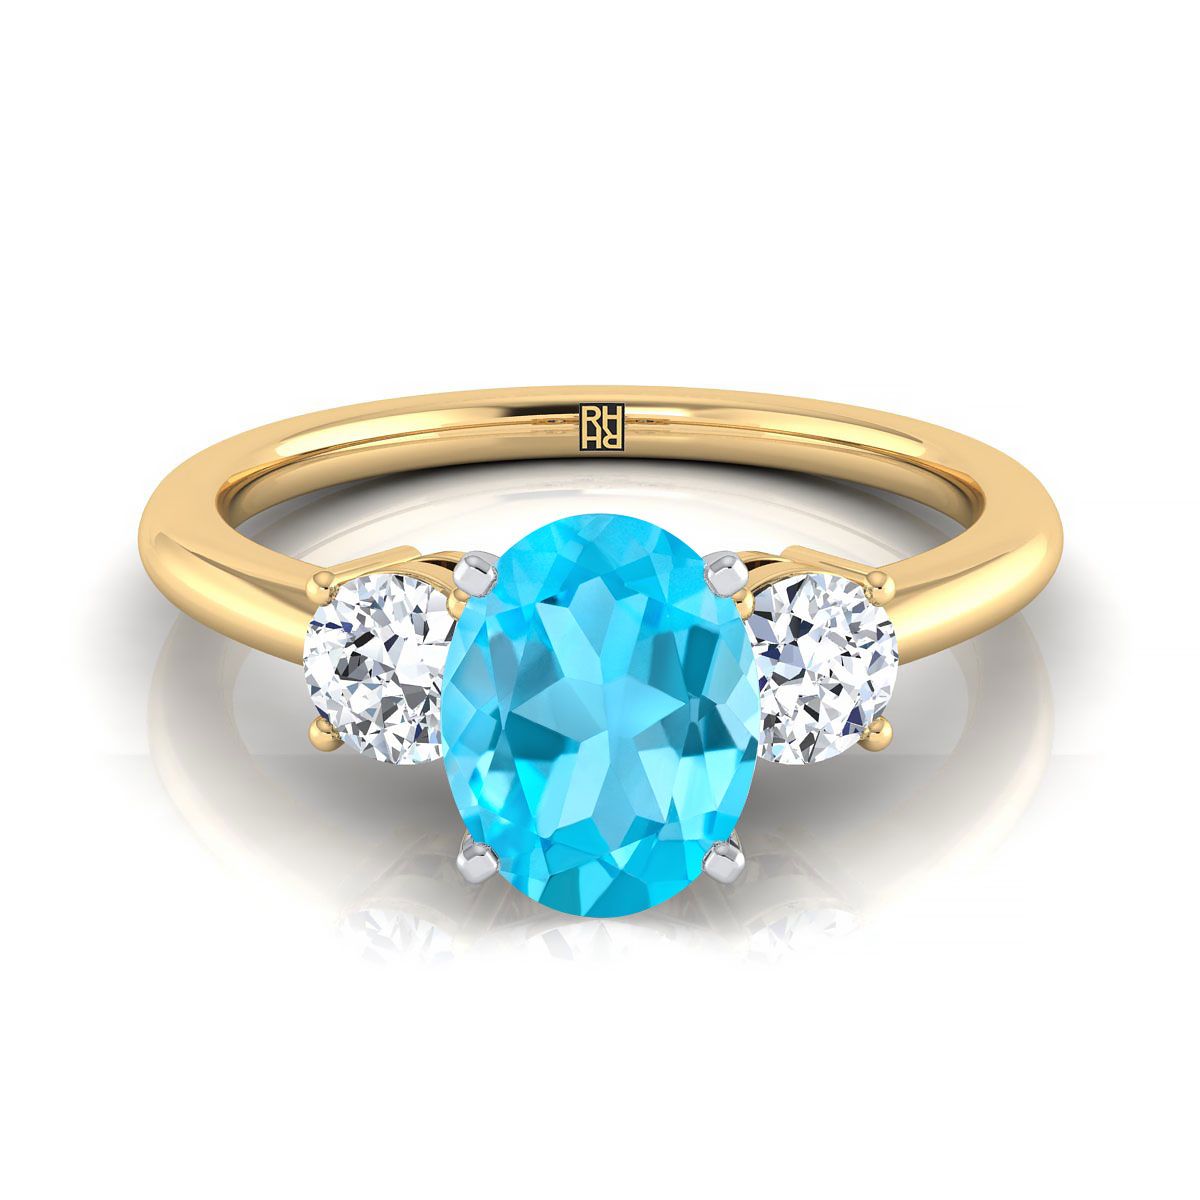 14K Yellow Gold Oval Swiss Blue Topaz Perfectly Matched Round Three Stone Diamond Engagement Ring -1/4ctw